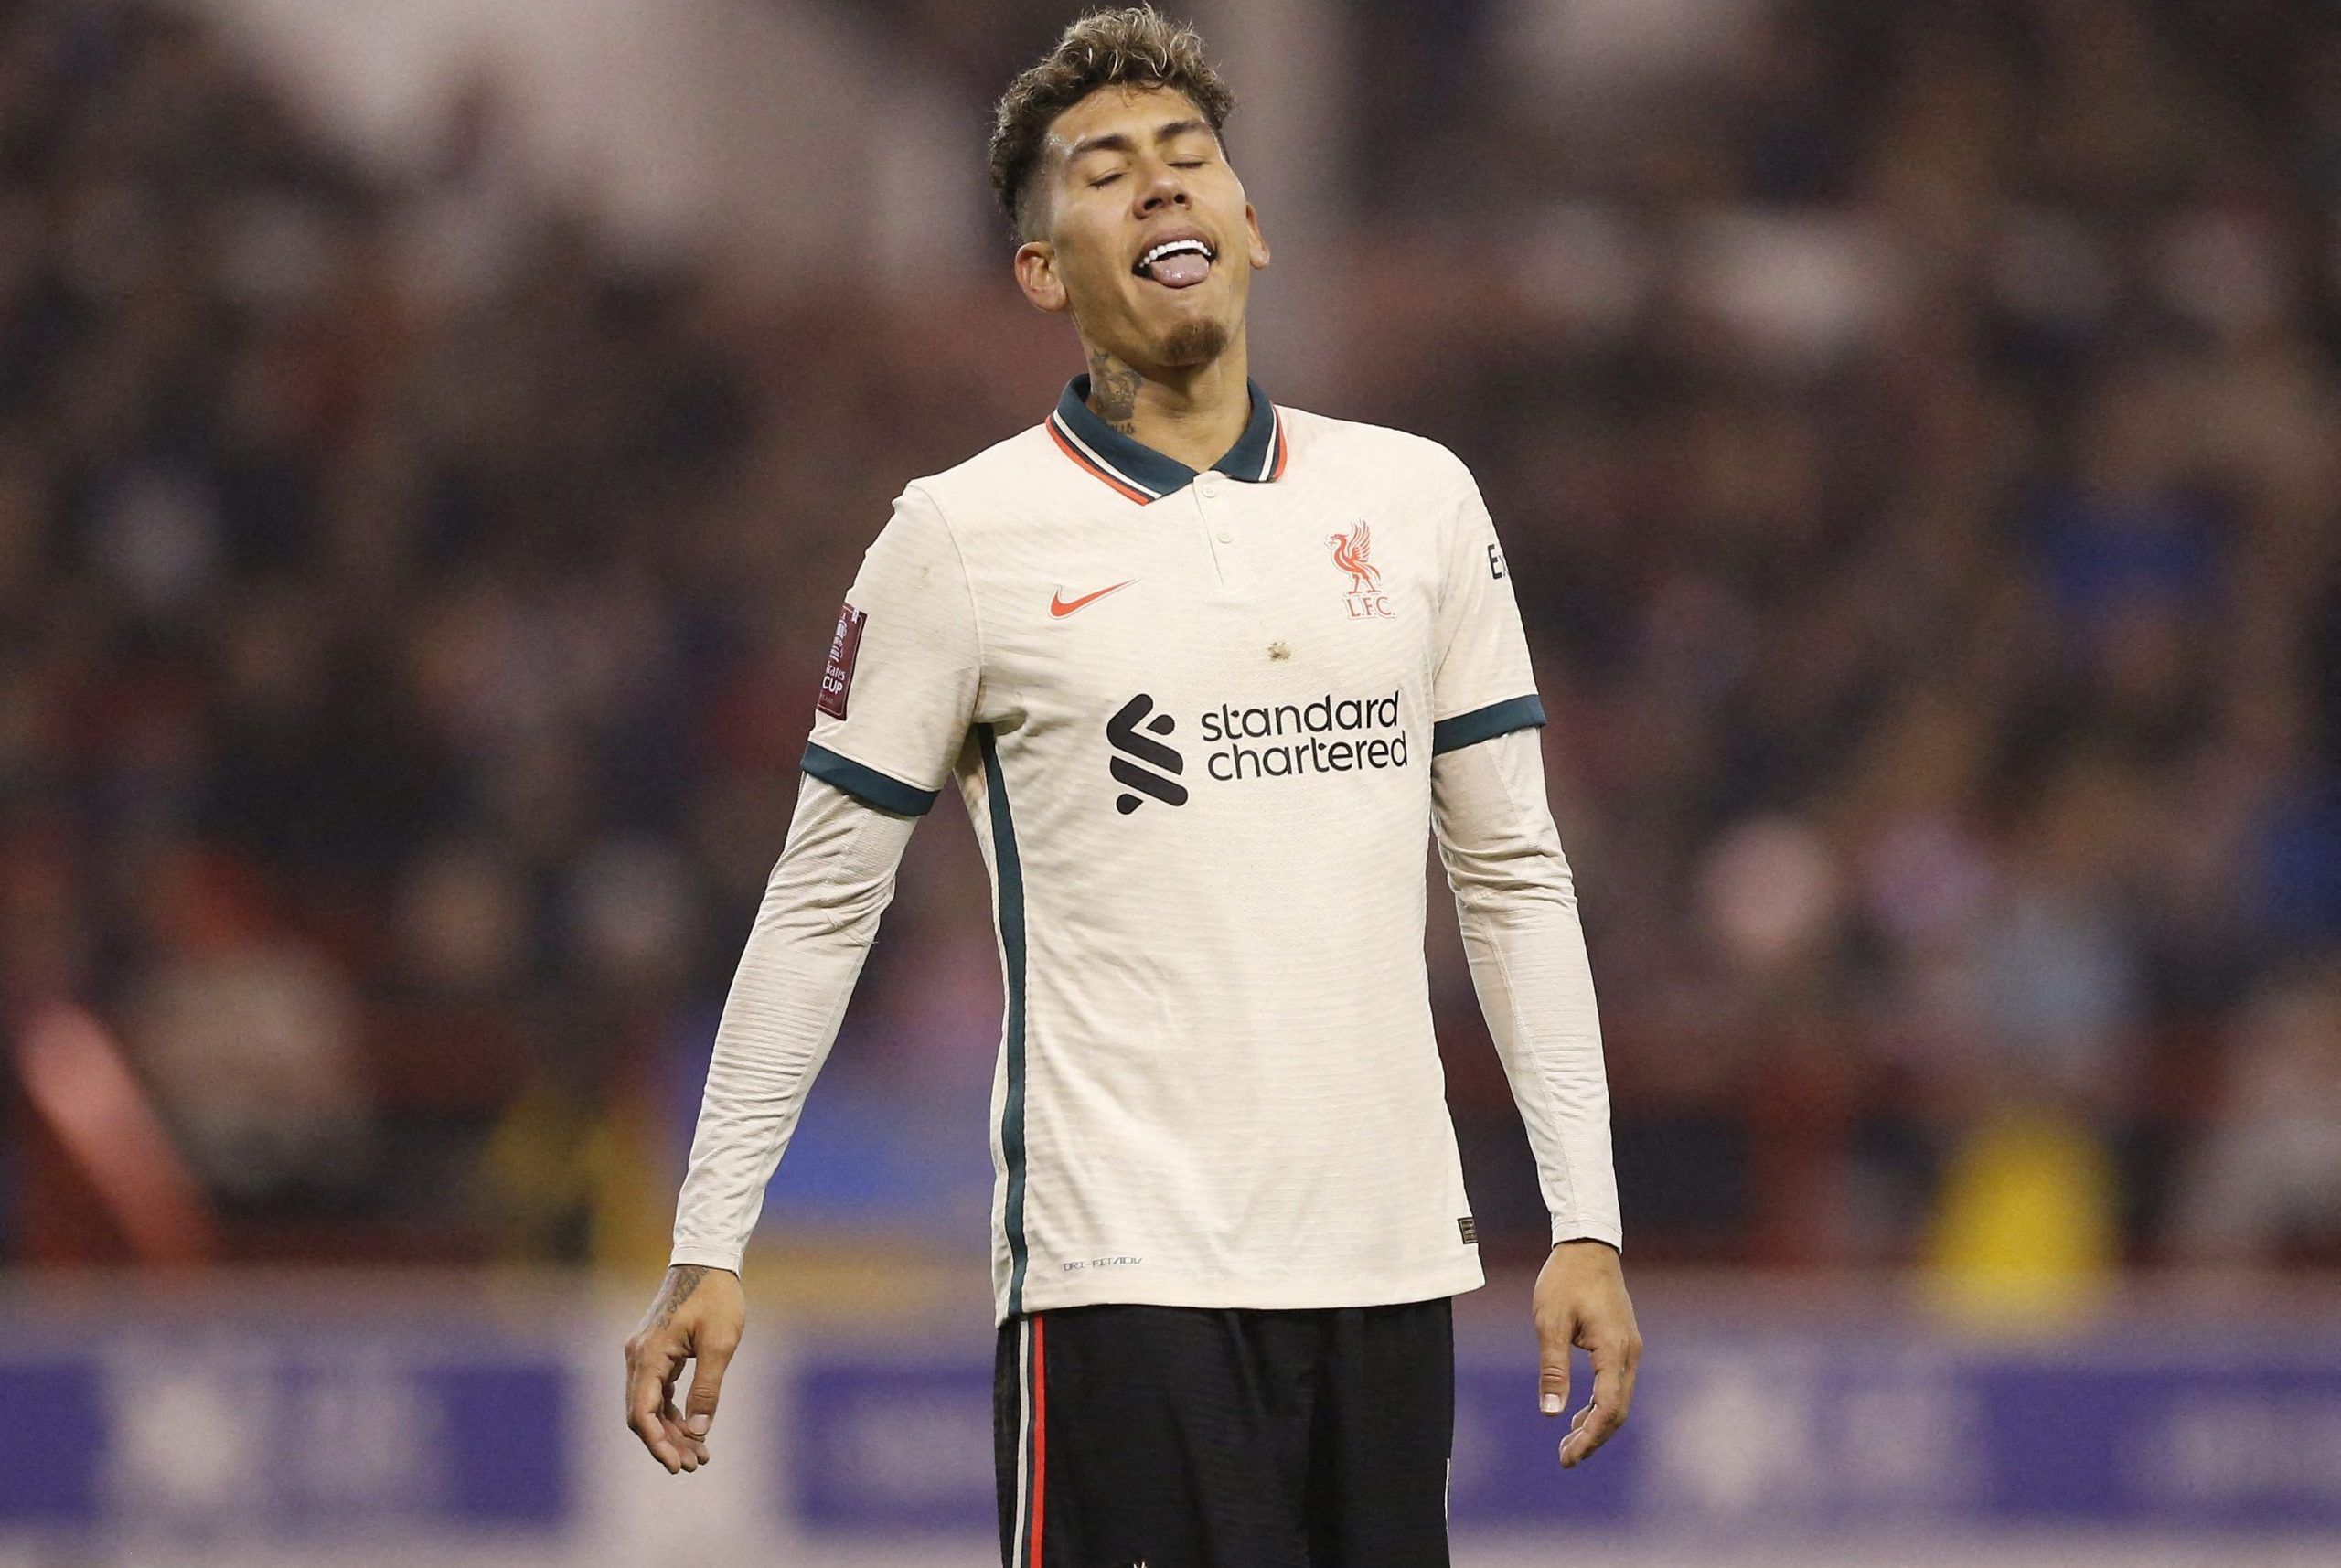 Liverpool's Roberto Firmino reacts Soccer Football - FA Cup Quarter Final - Nottingham Forest v Liverpool - The City Ground, Nottingham, Britain - March 20, 2022 Liverpool's Roberto Firmino reacts REUTERS/Craig Brough